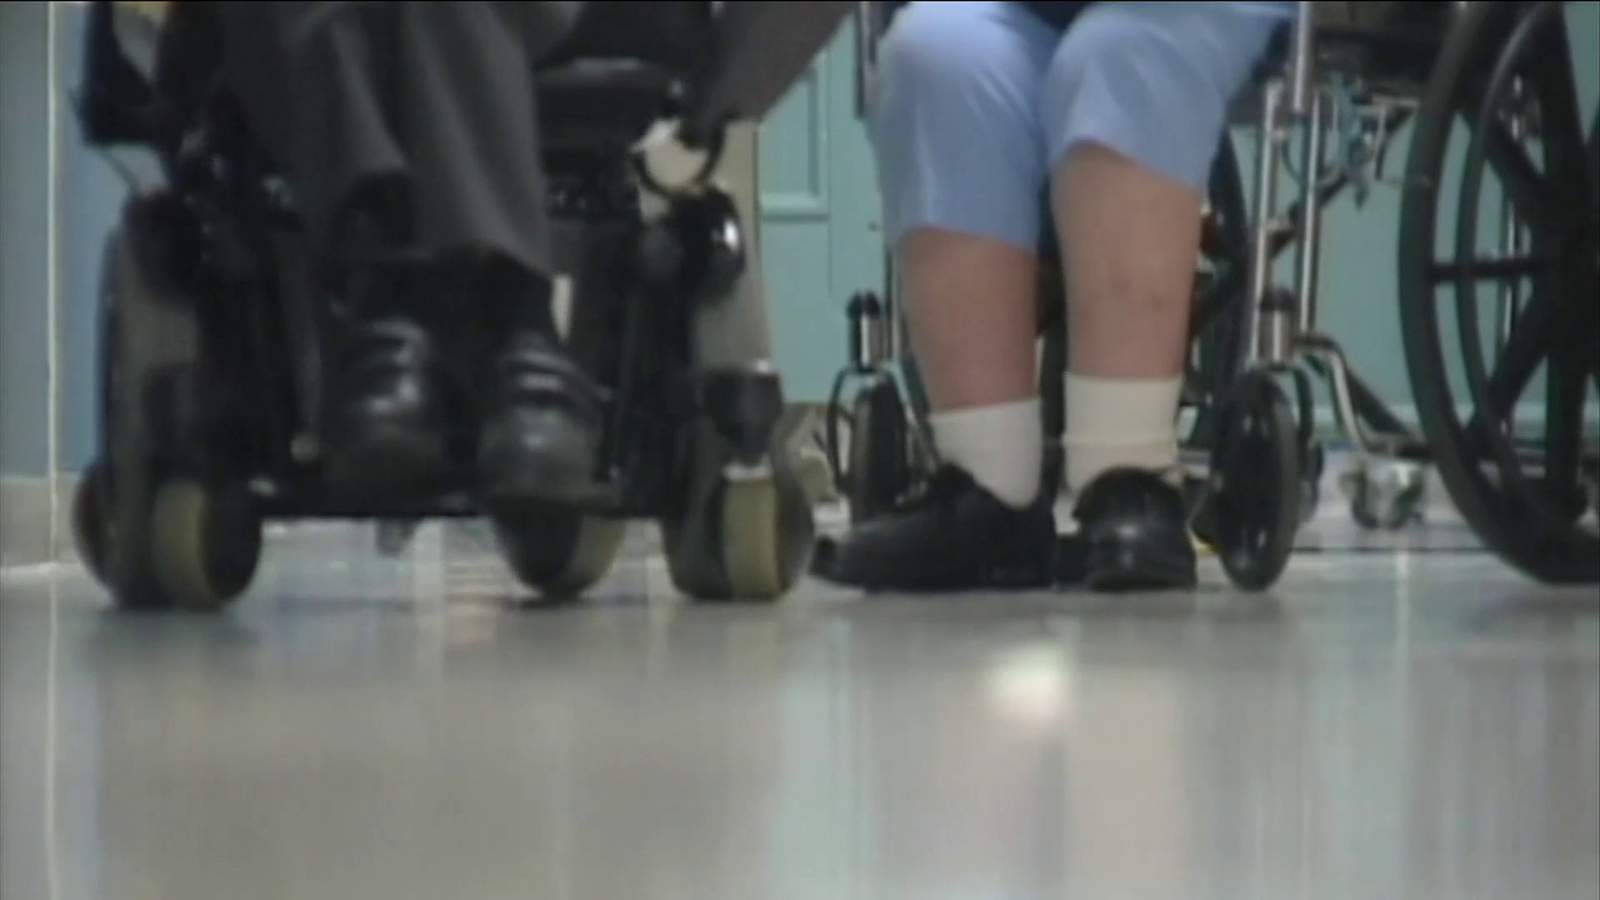 AARP points to higher nursing home death rate in Florida